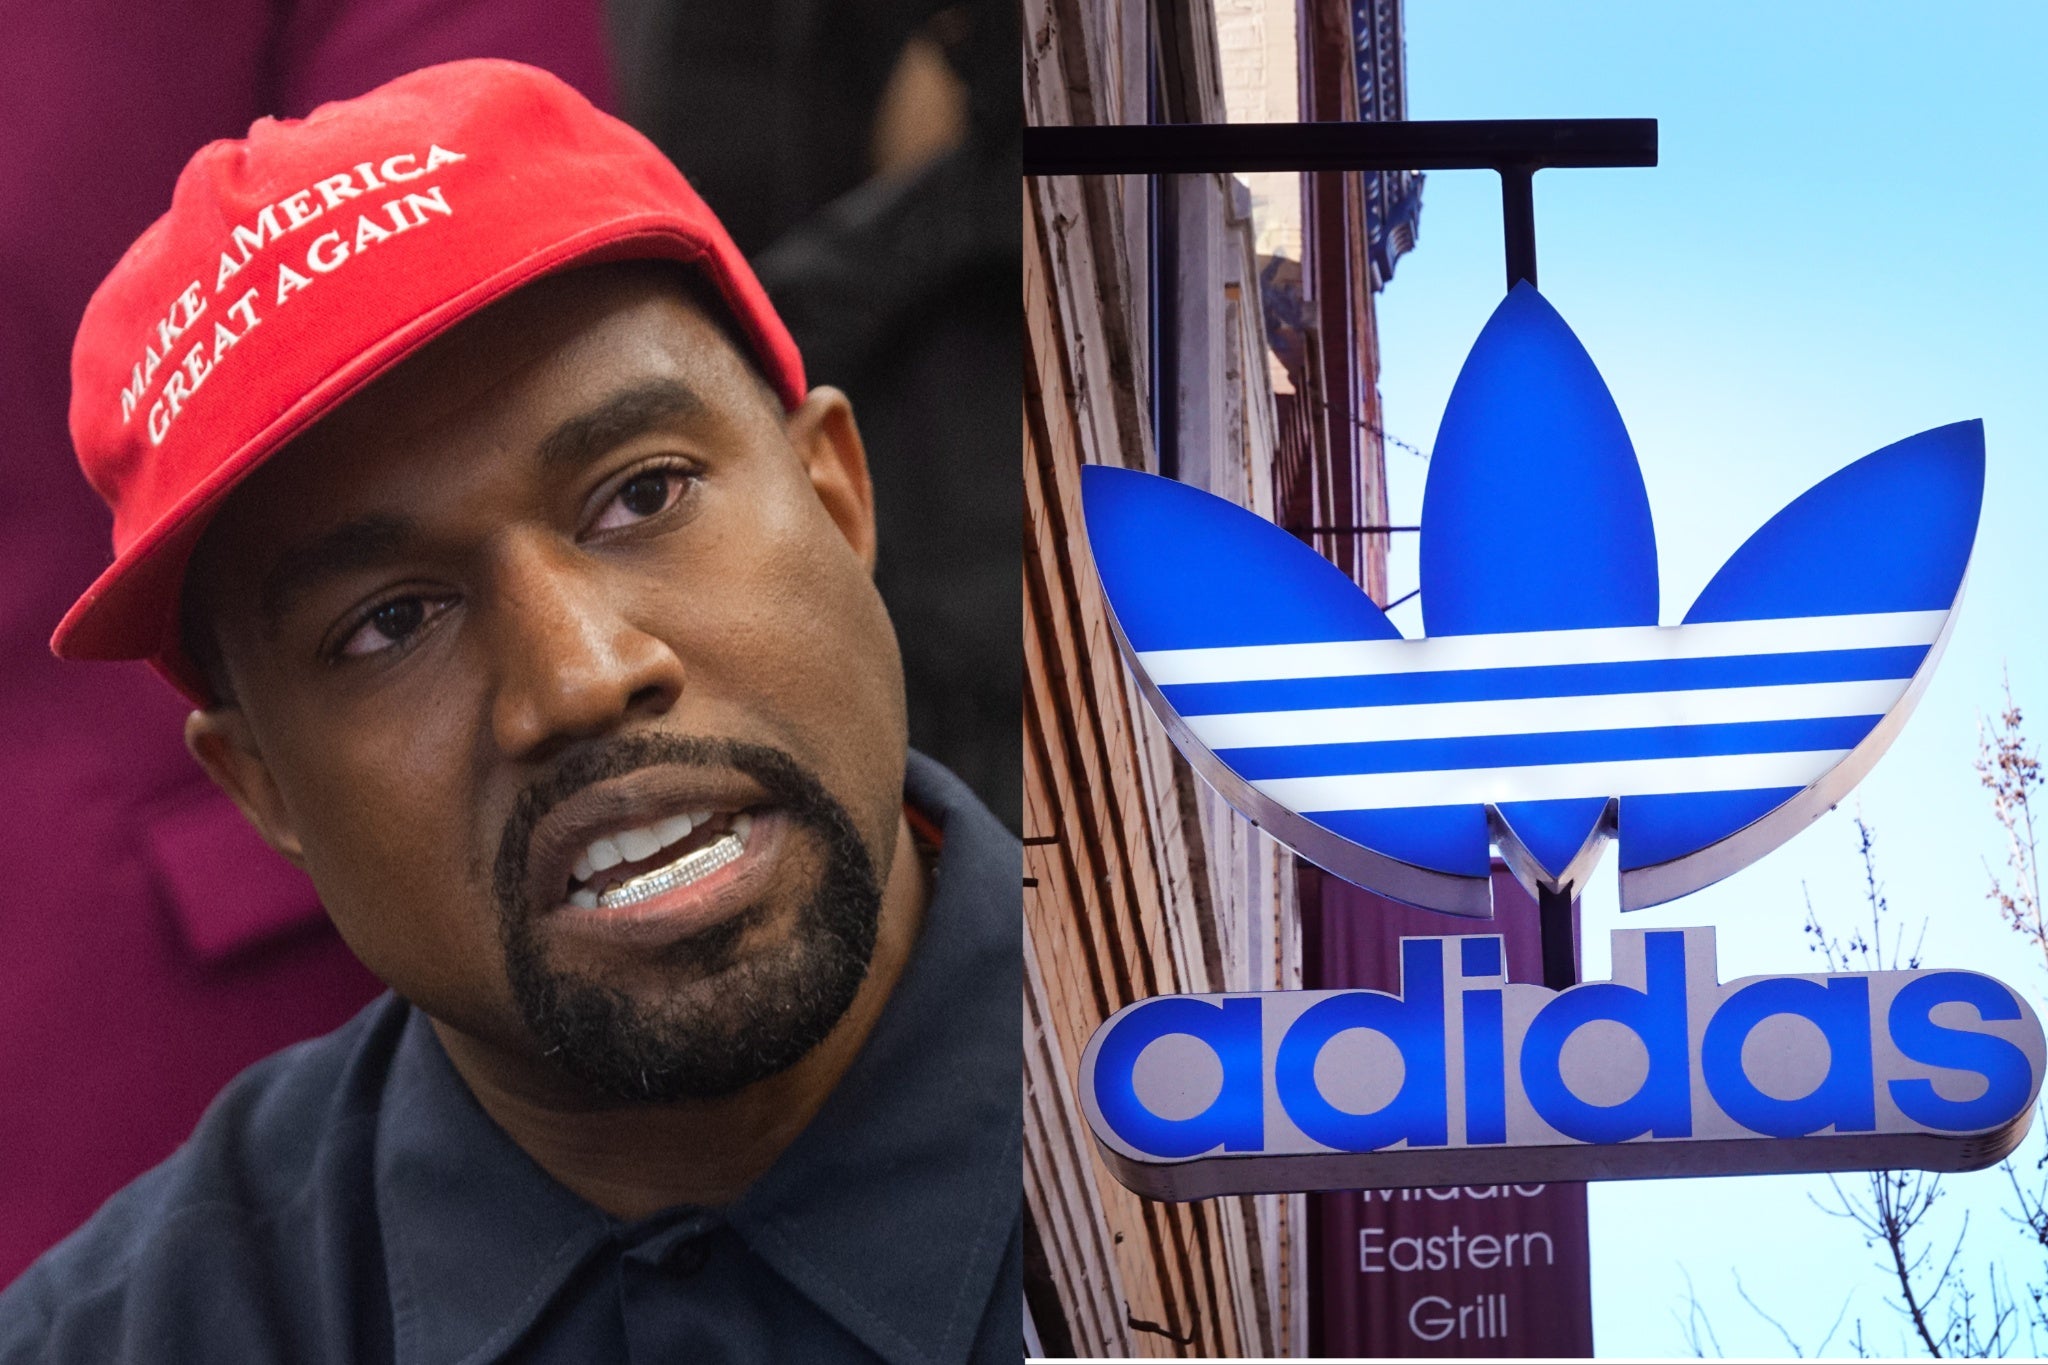 Kanye West Drew a Swastika at a Yeezy Meeting With Adidas: Report